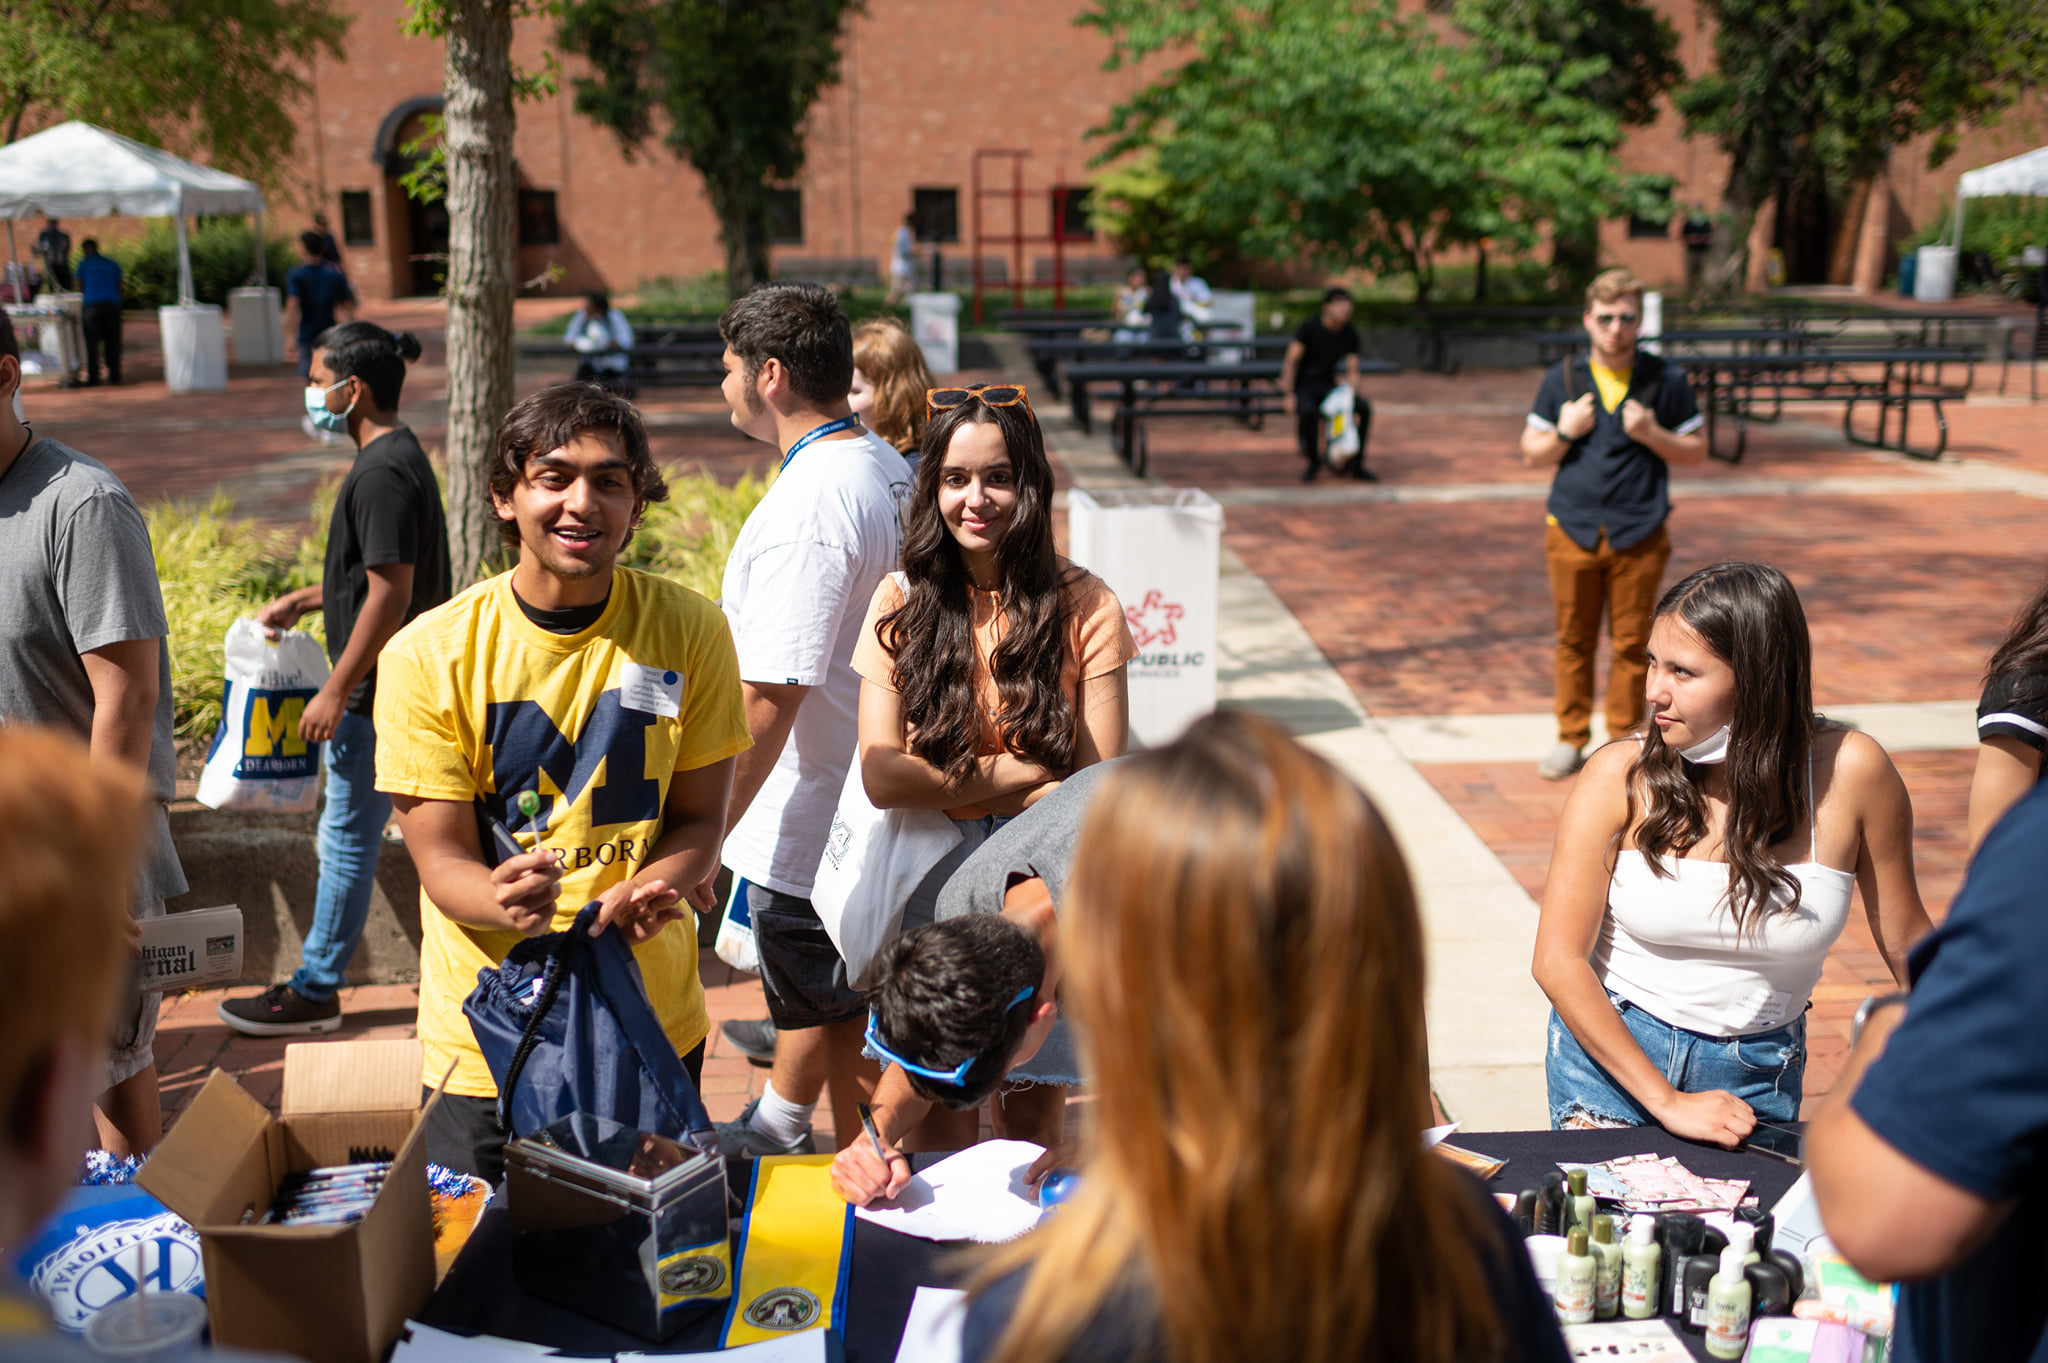 Smiling students line up to get swag at a welcome back to campus event on a sunny day in September.